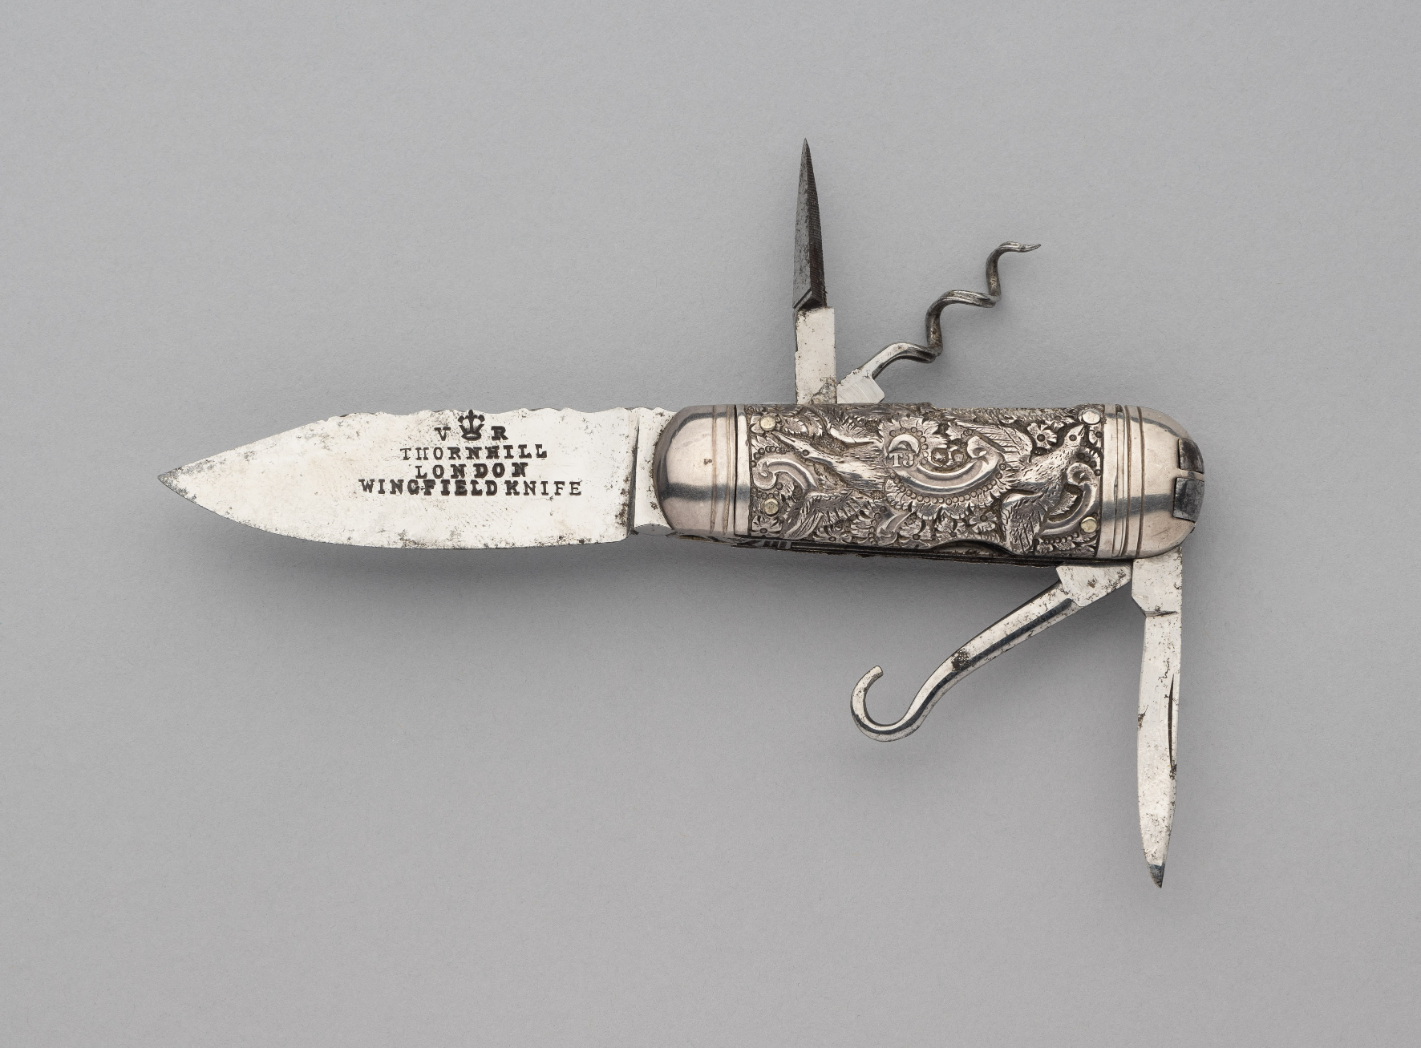 A SILVER-MOUNTED FIXED-BLADE COMPANION KNIFE, THORNHILL, LONDON, 1874, PROBABLY THOMAS JOHNSON